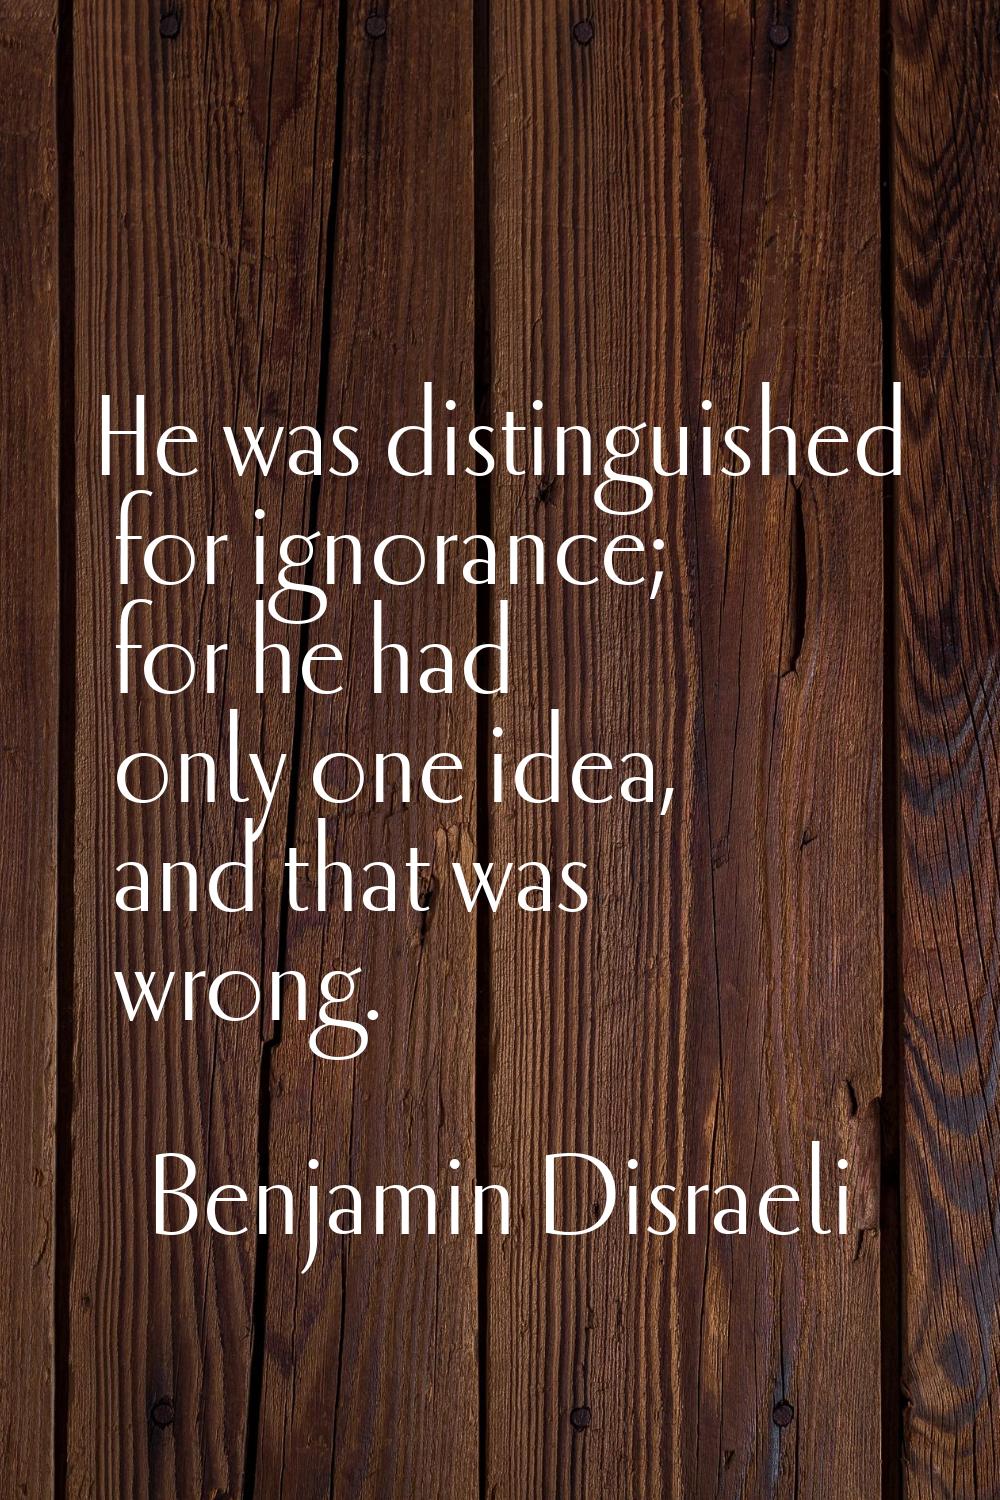 He was distinguished for ignorance; for he had only one idea, and that was wrong.